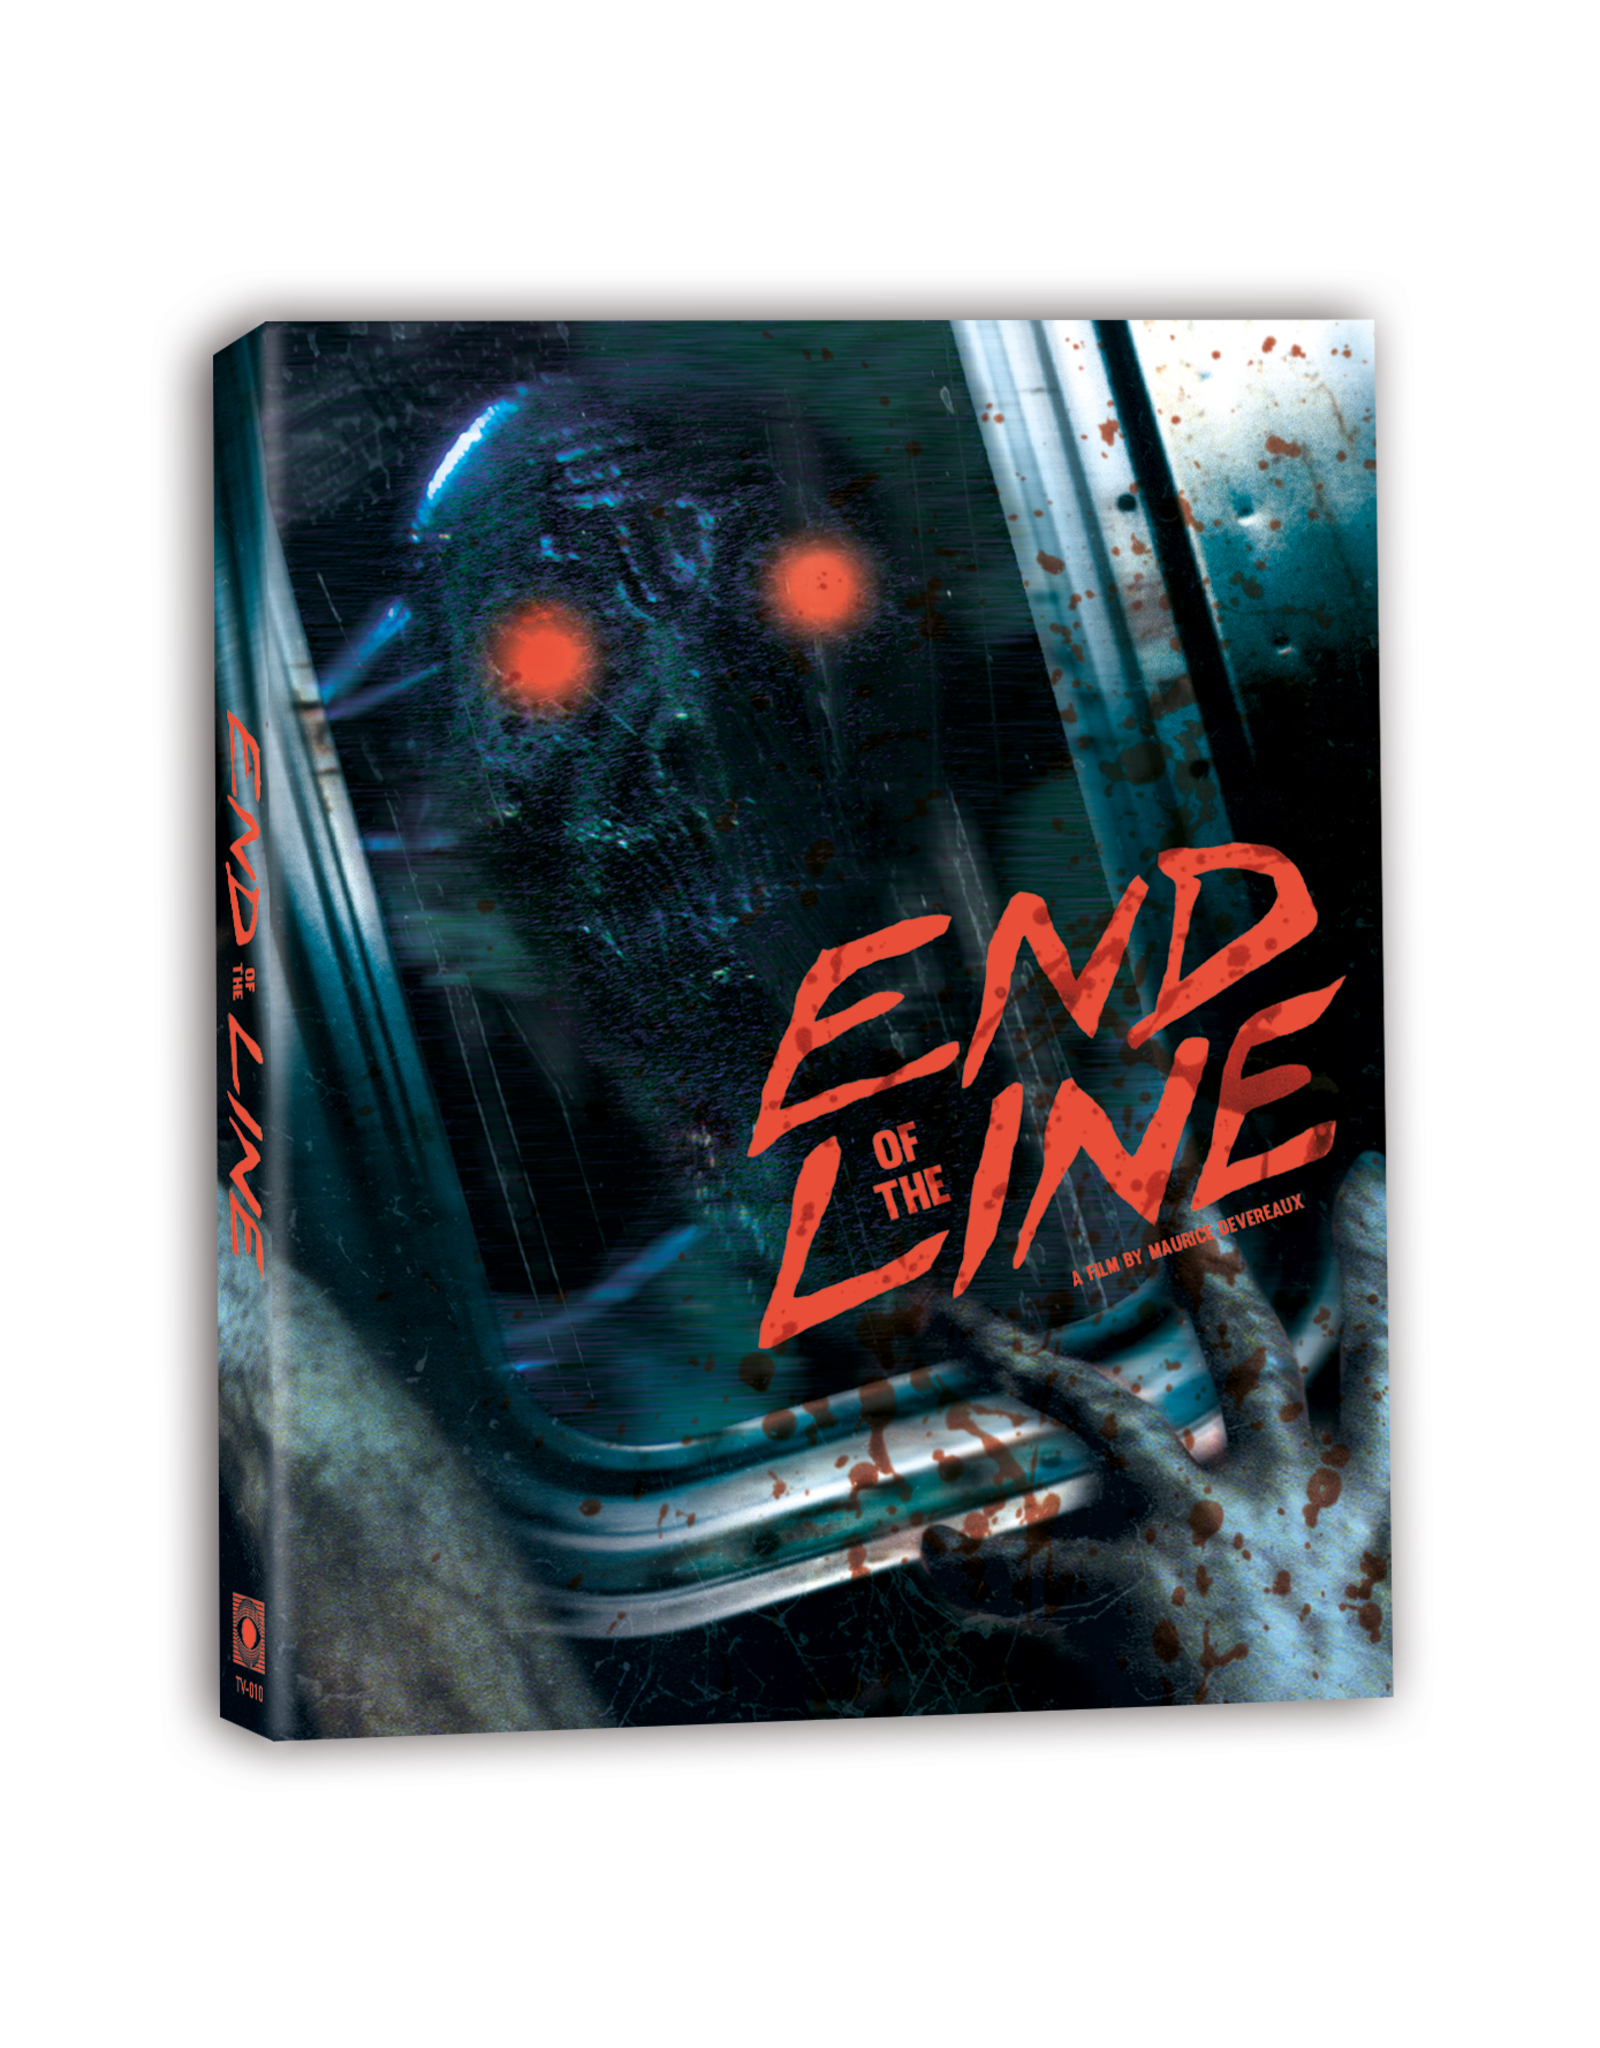 Horror End of the Line - Terror Vision (Brand New w/ Slipcover)